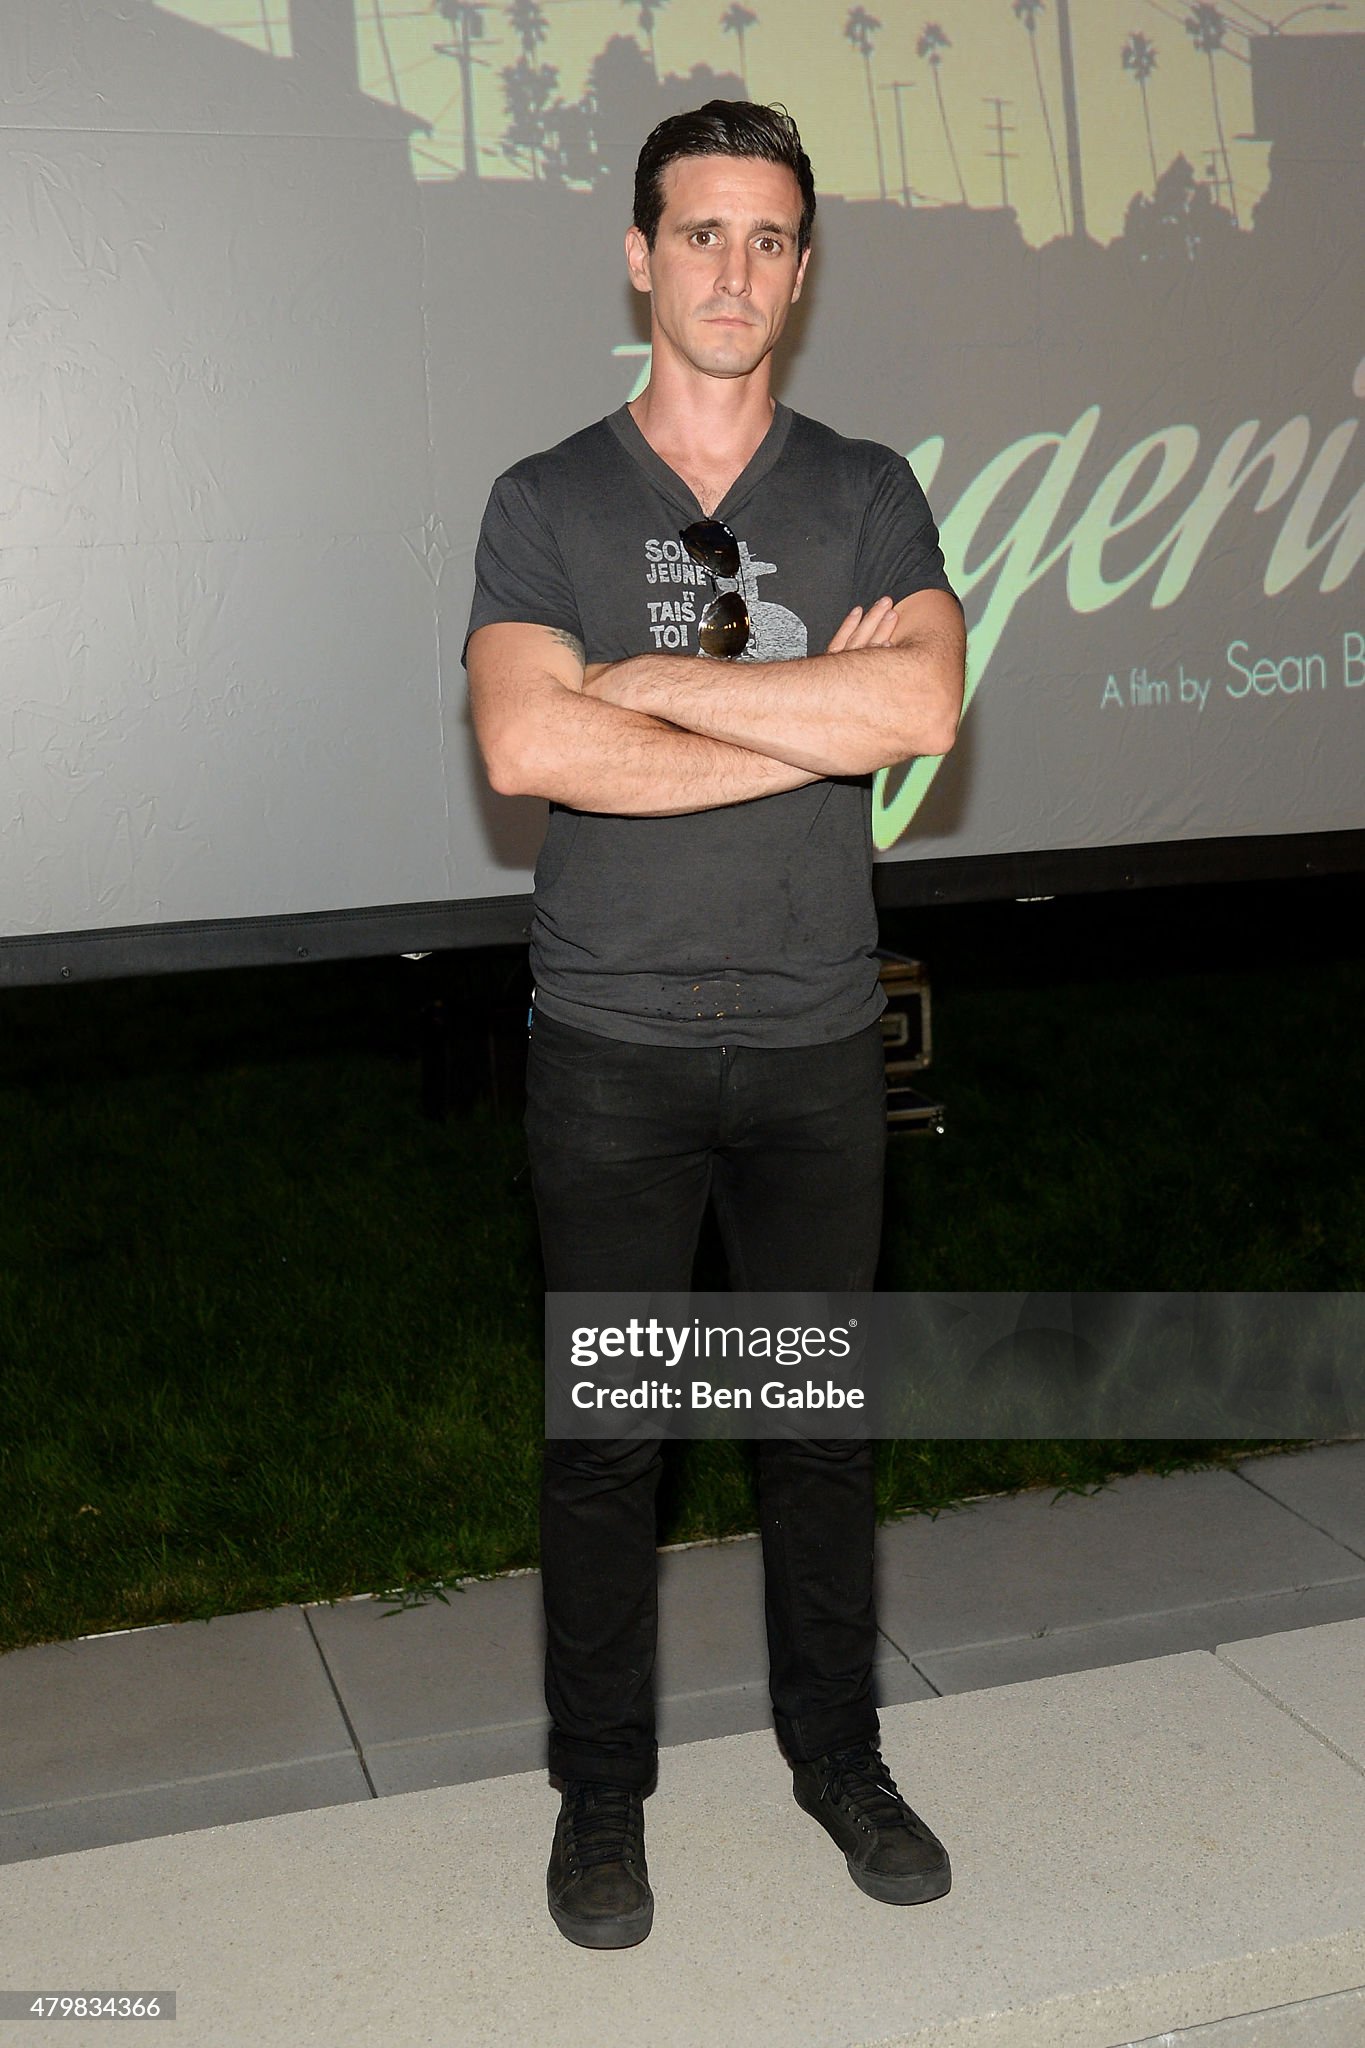 ¿Cuánto mide James Ransone? - Altura - Real height New-york-ny-actor-james-ransone-attends-the-tangerine-new-york-screening-at-john-jay-college-on